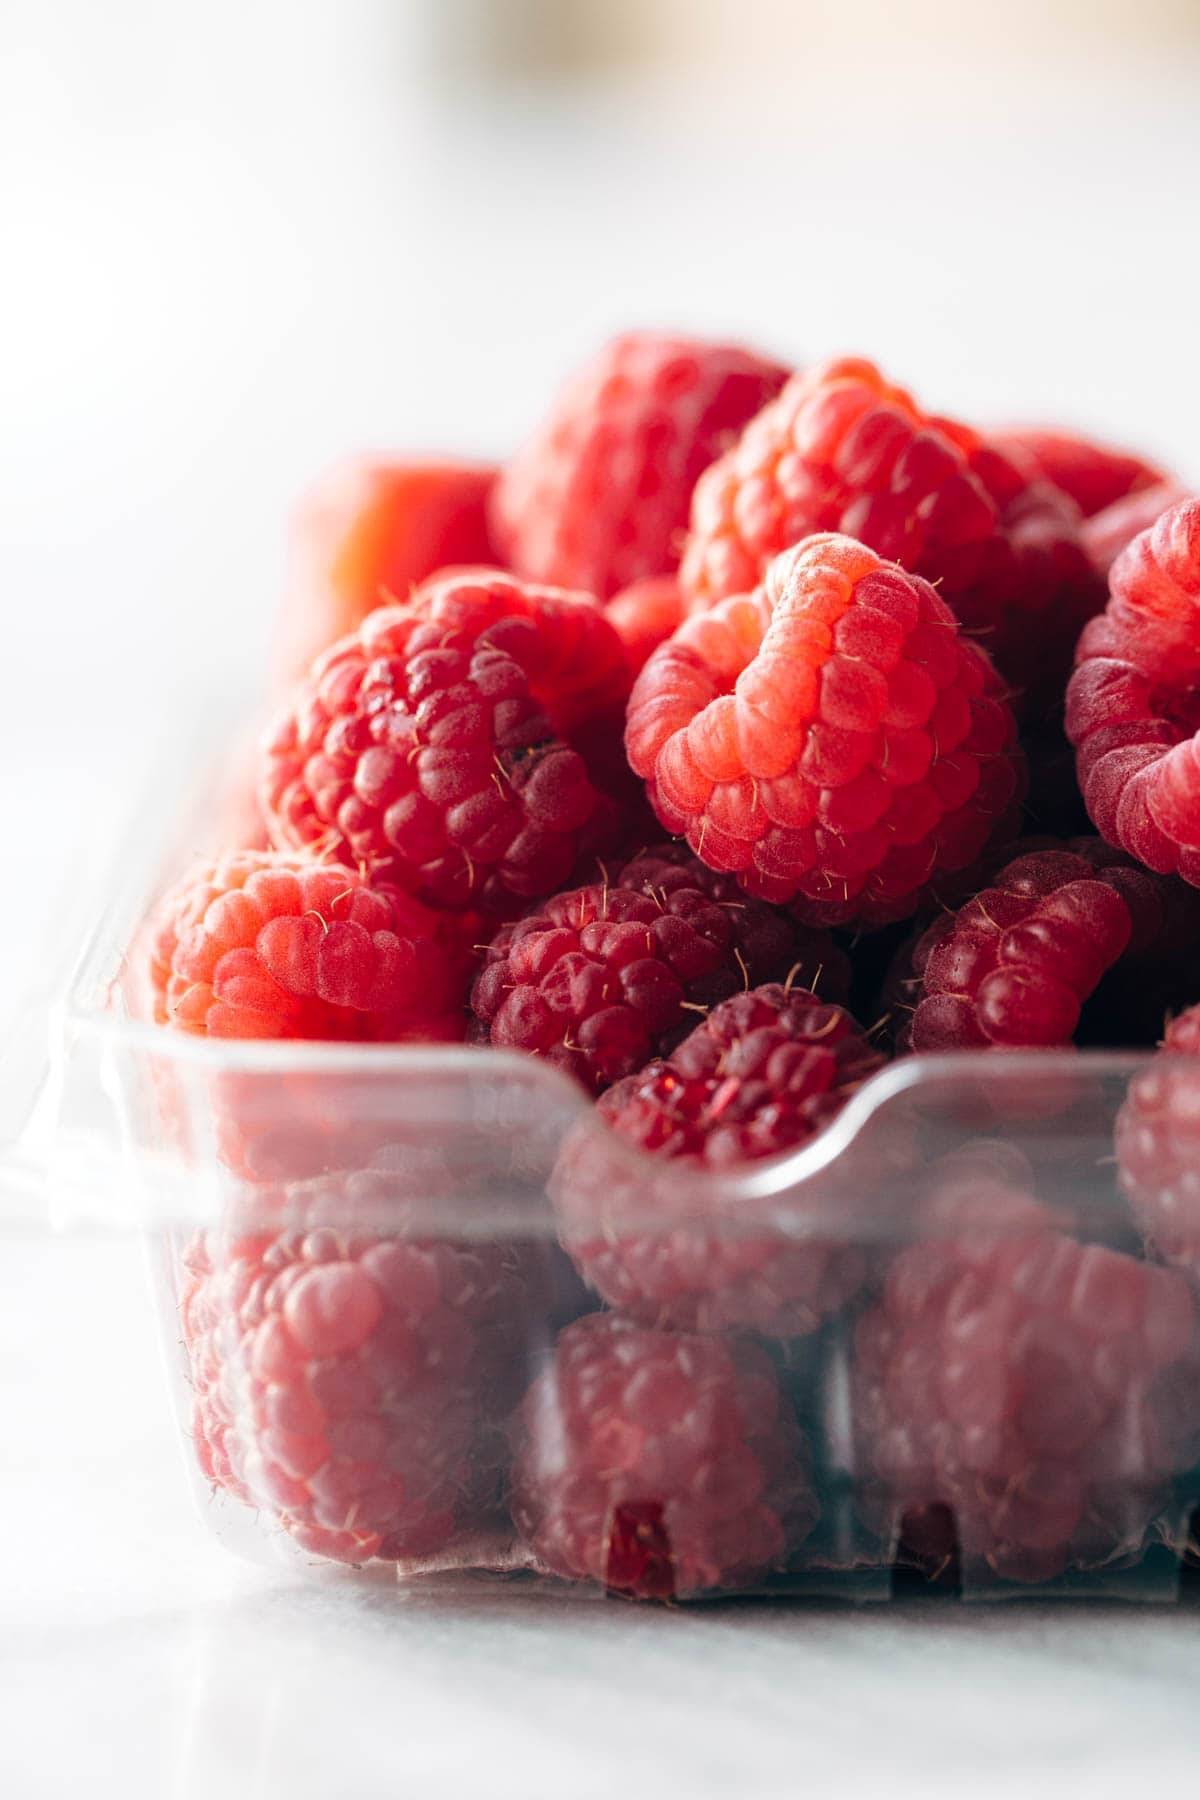 Raspberries in a container.